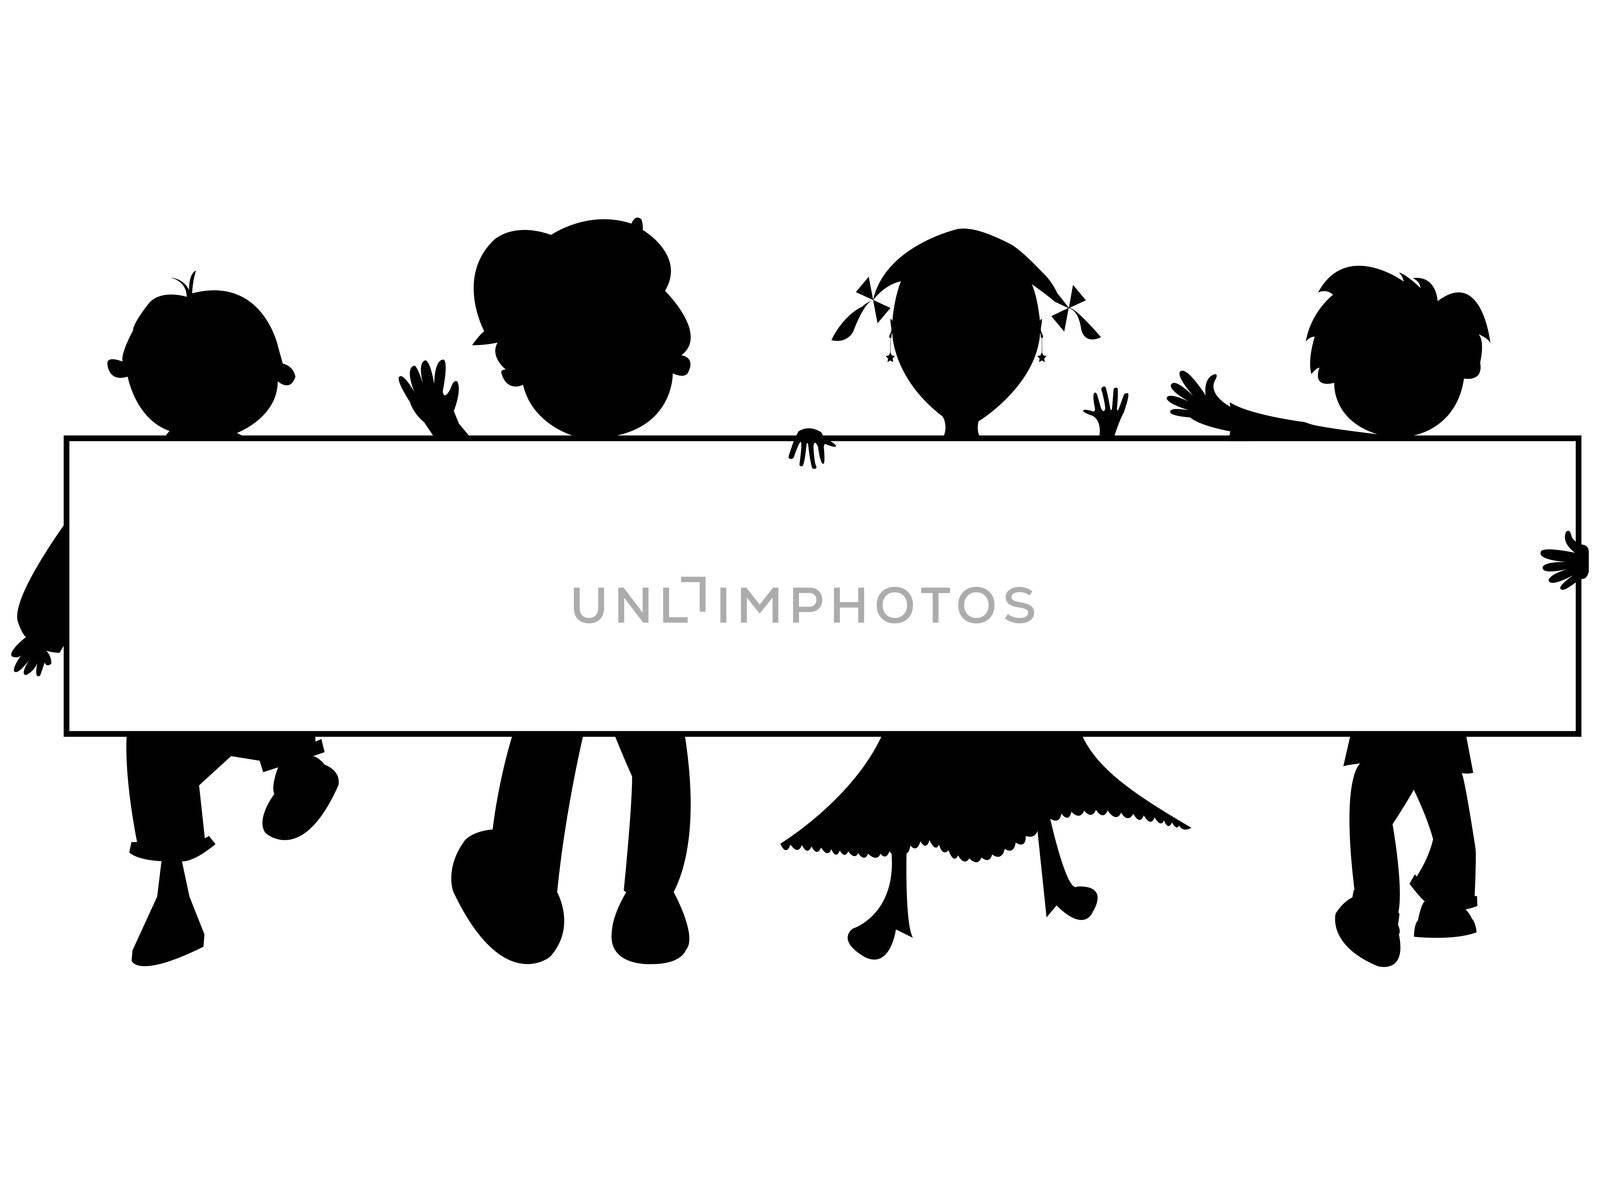 kids silhouettes banner against white background, abstract vector art illustration